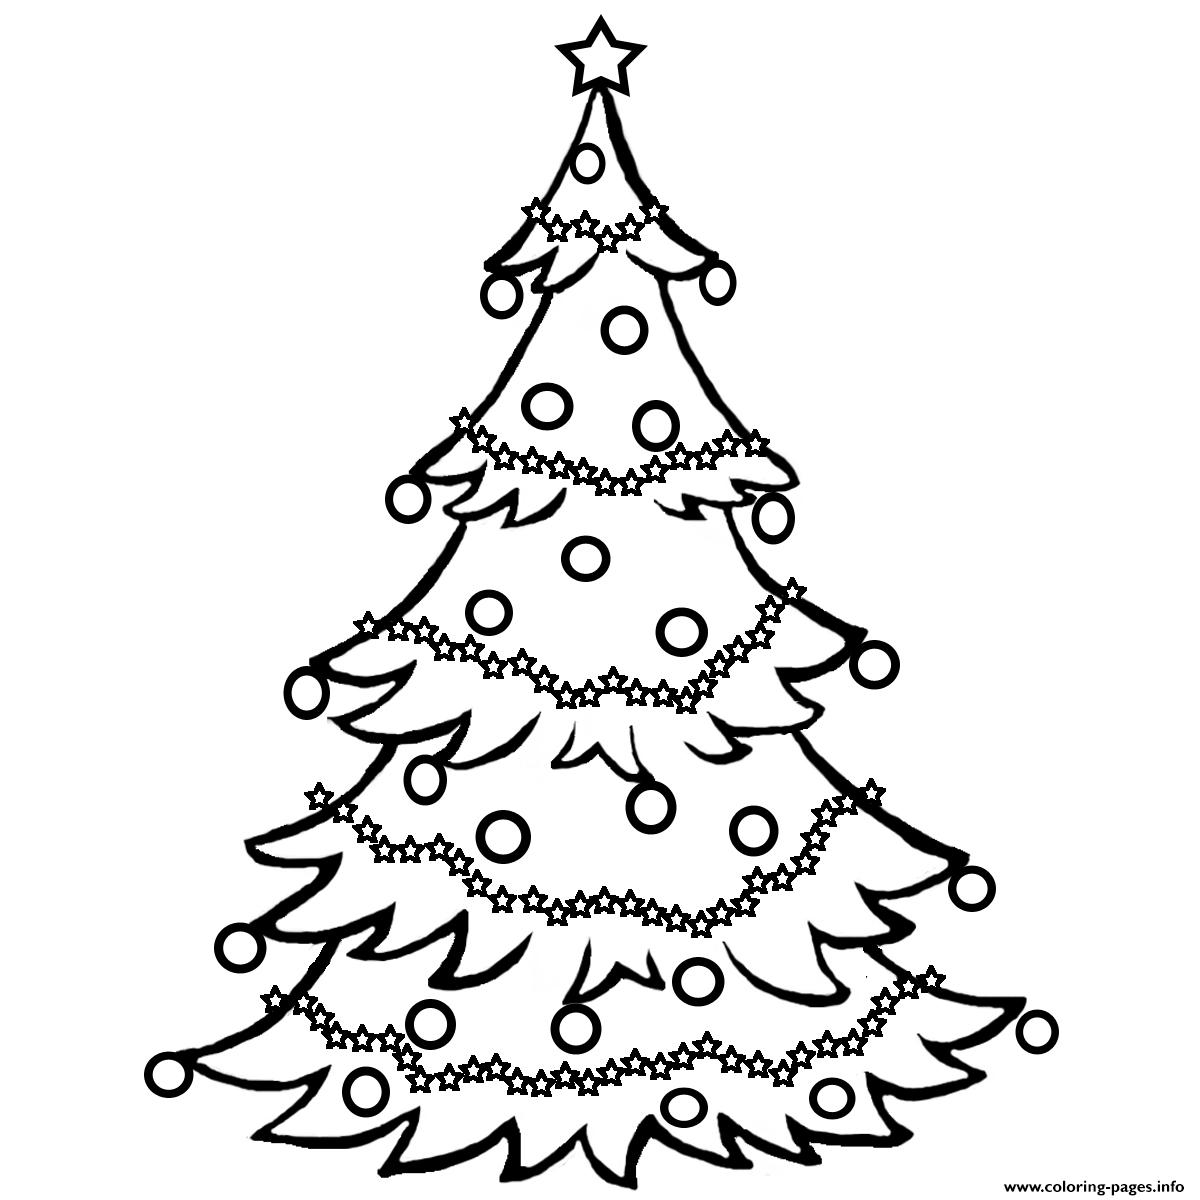 Coloring Pages : Christmas Tree Coloring Pages Cute To Print